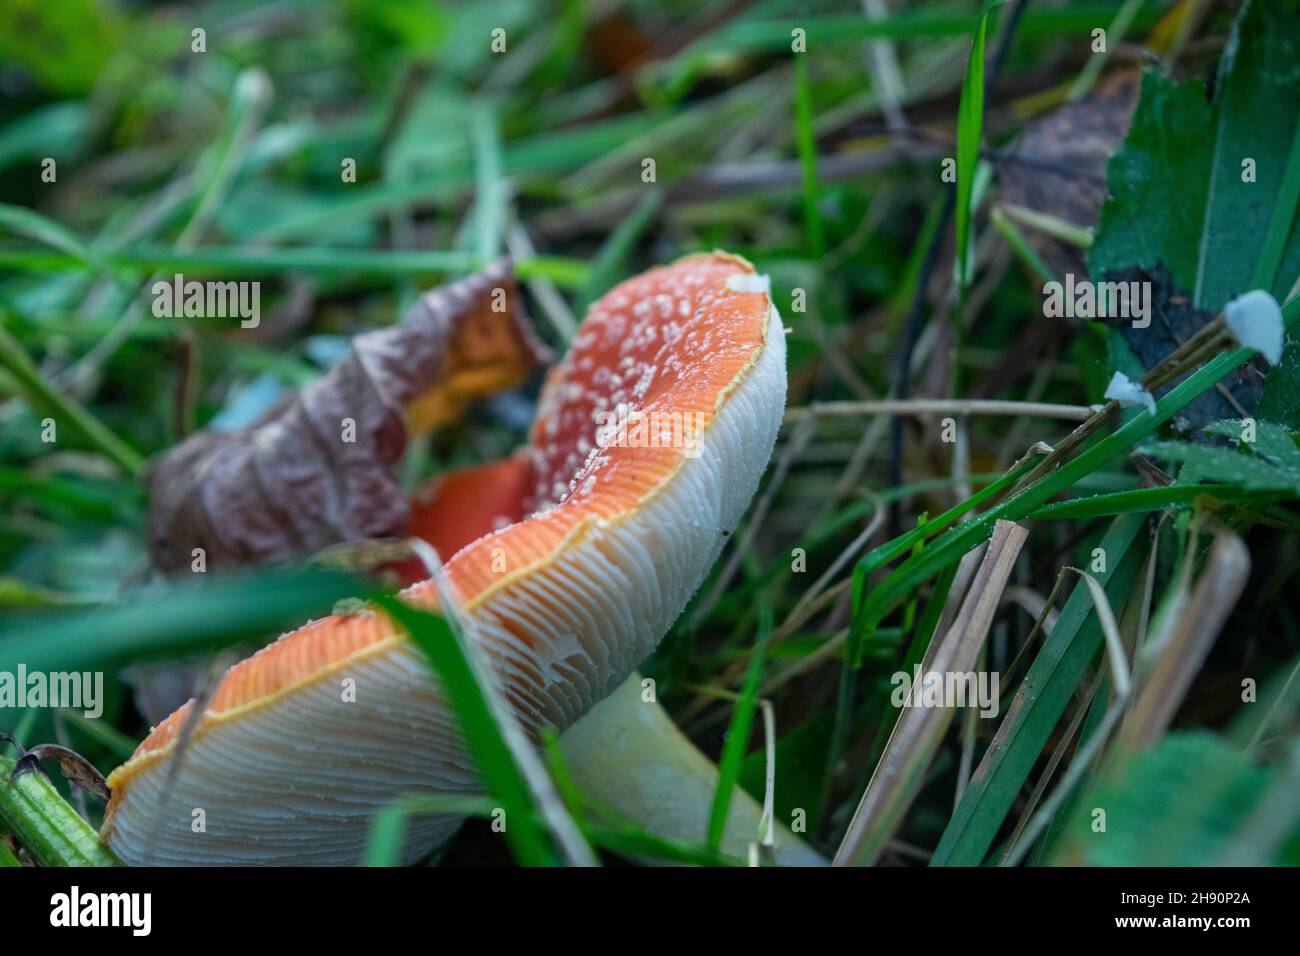 A poisonous and hallucinogenic mushroom Fly agaric in the grass against the background of an autumn forest. Red poisonous mushroom close-up in the nat Stock Photo